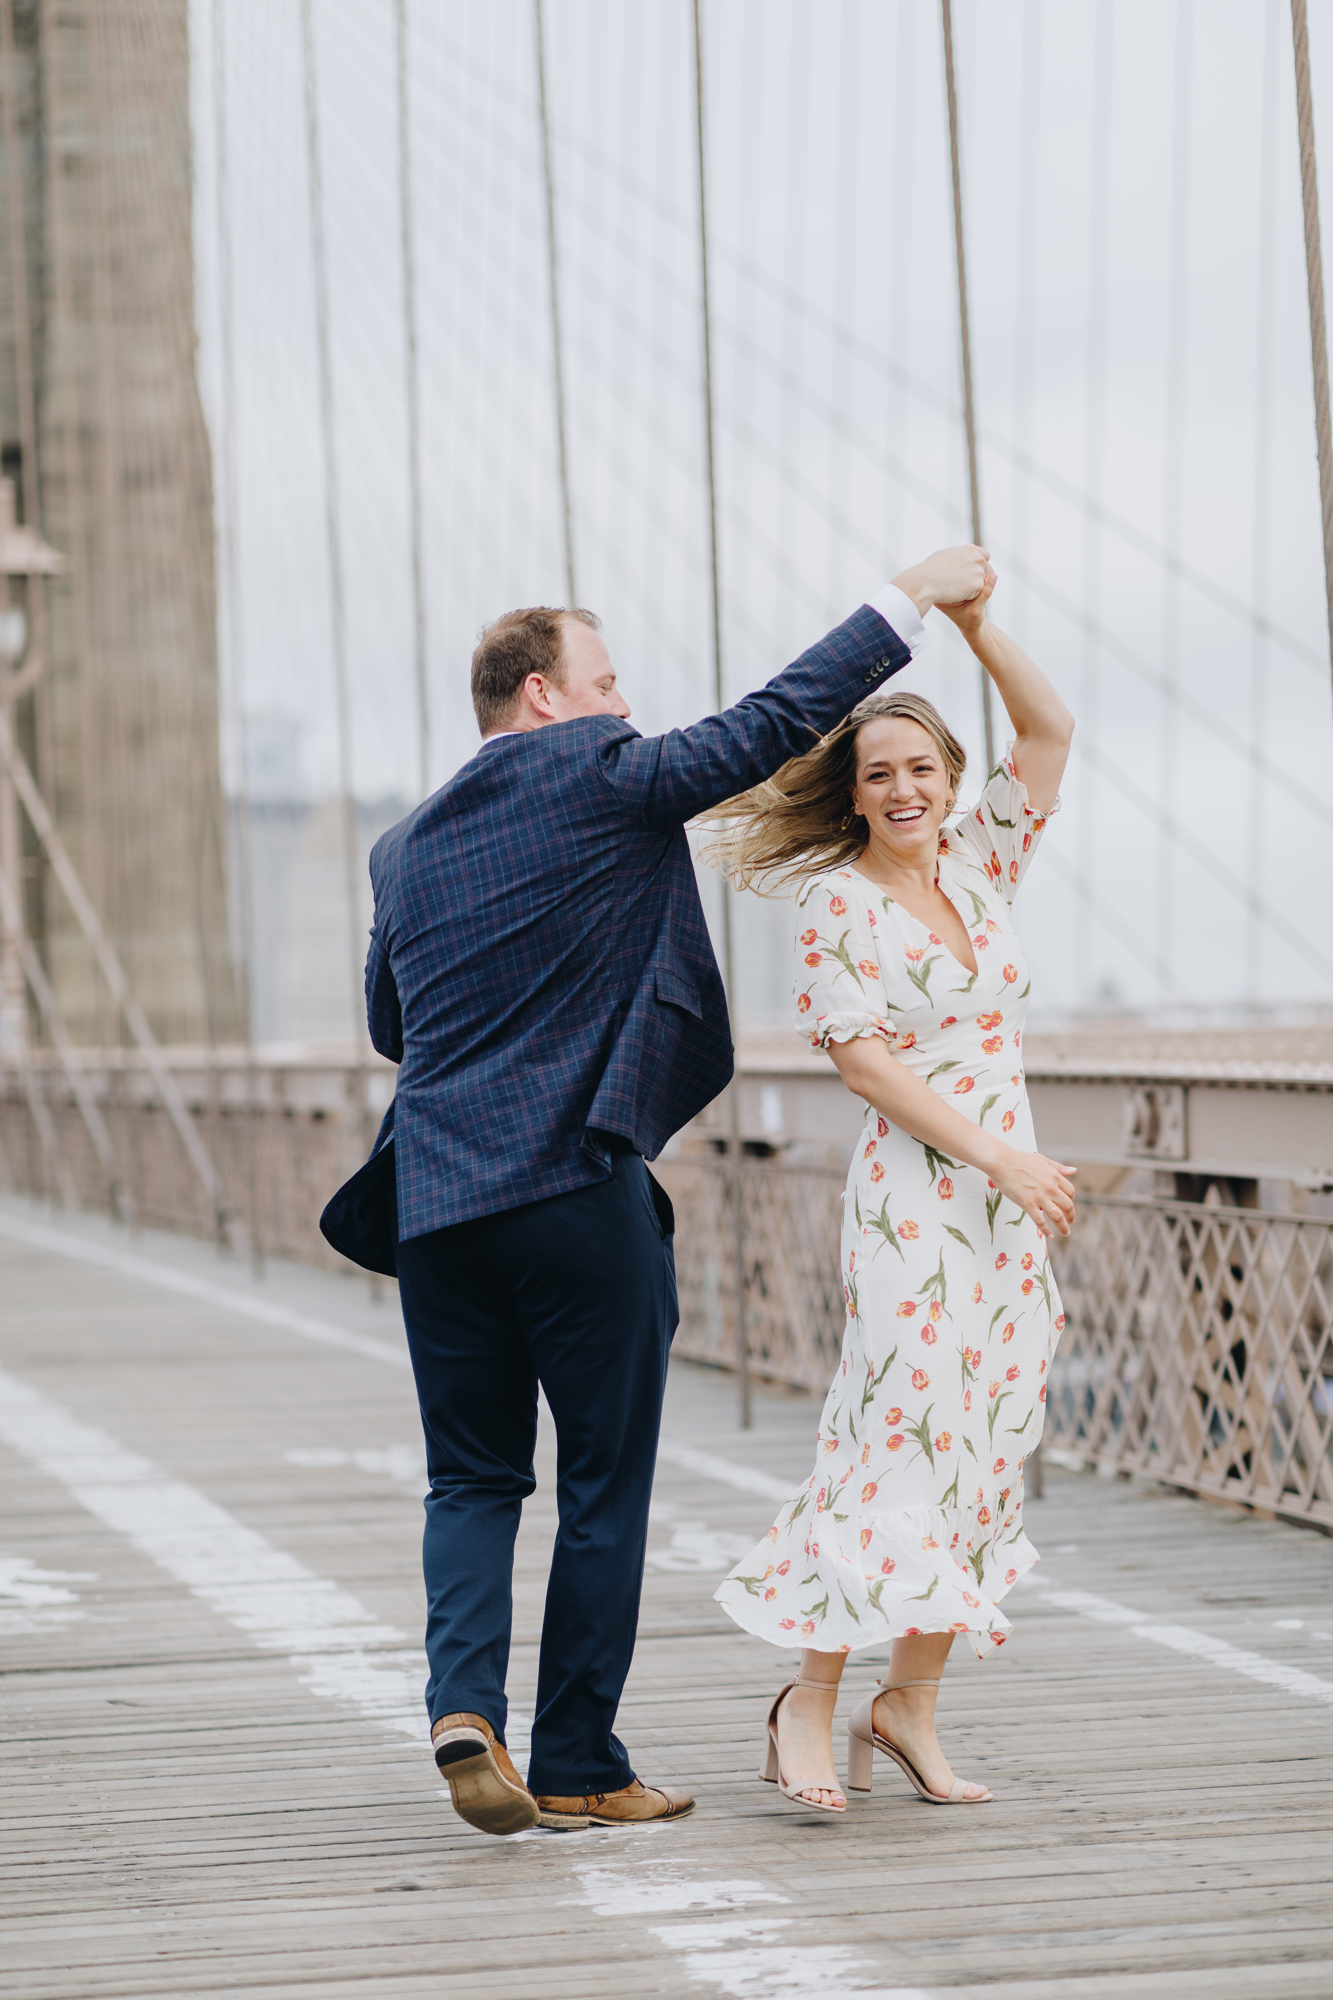 Pretty Engagement Photo Sessions in NYC